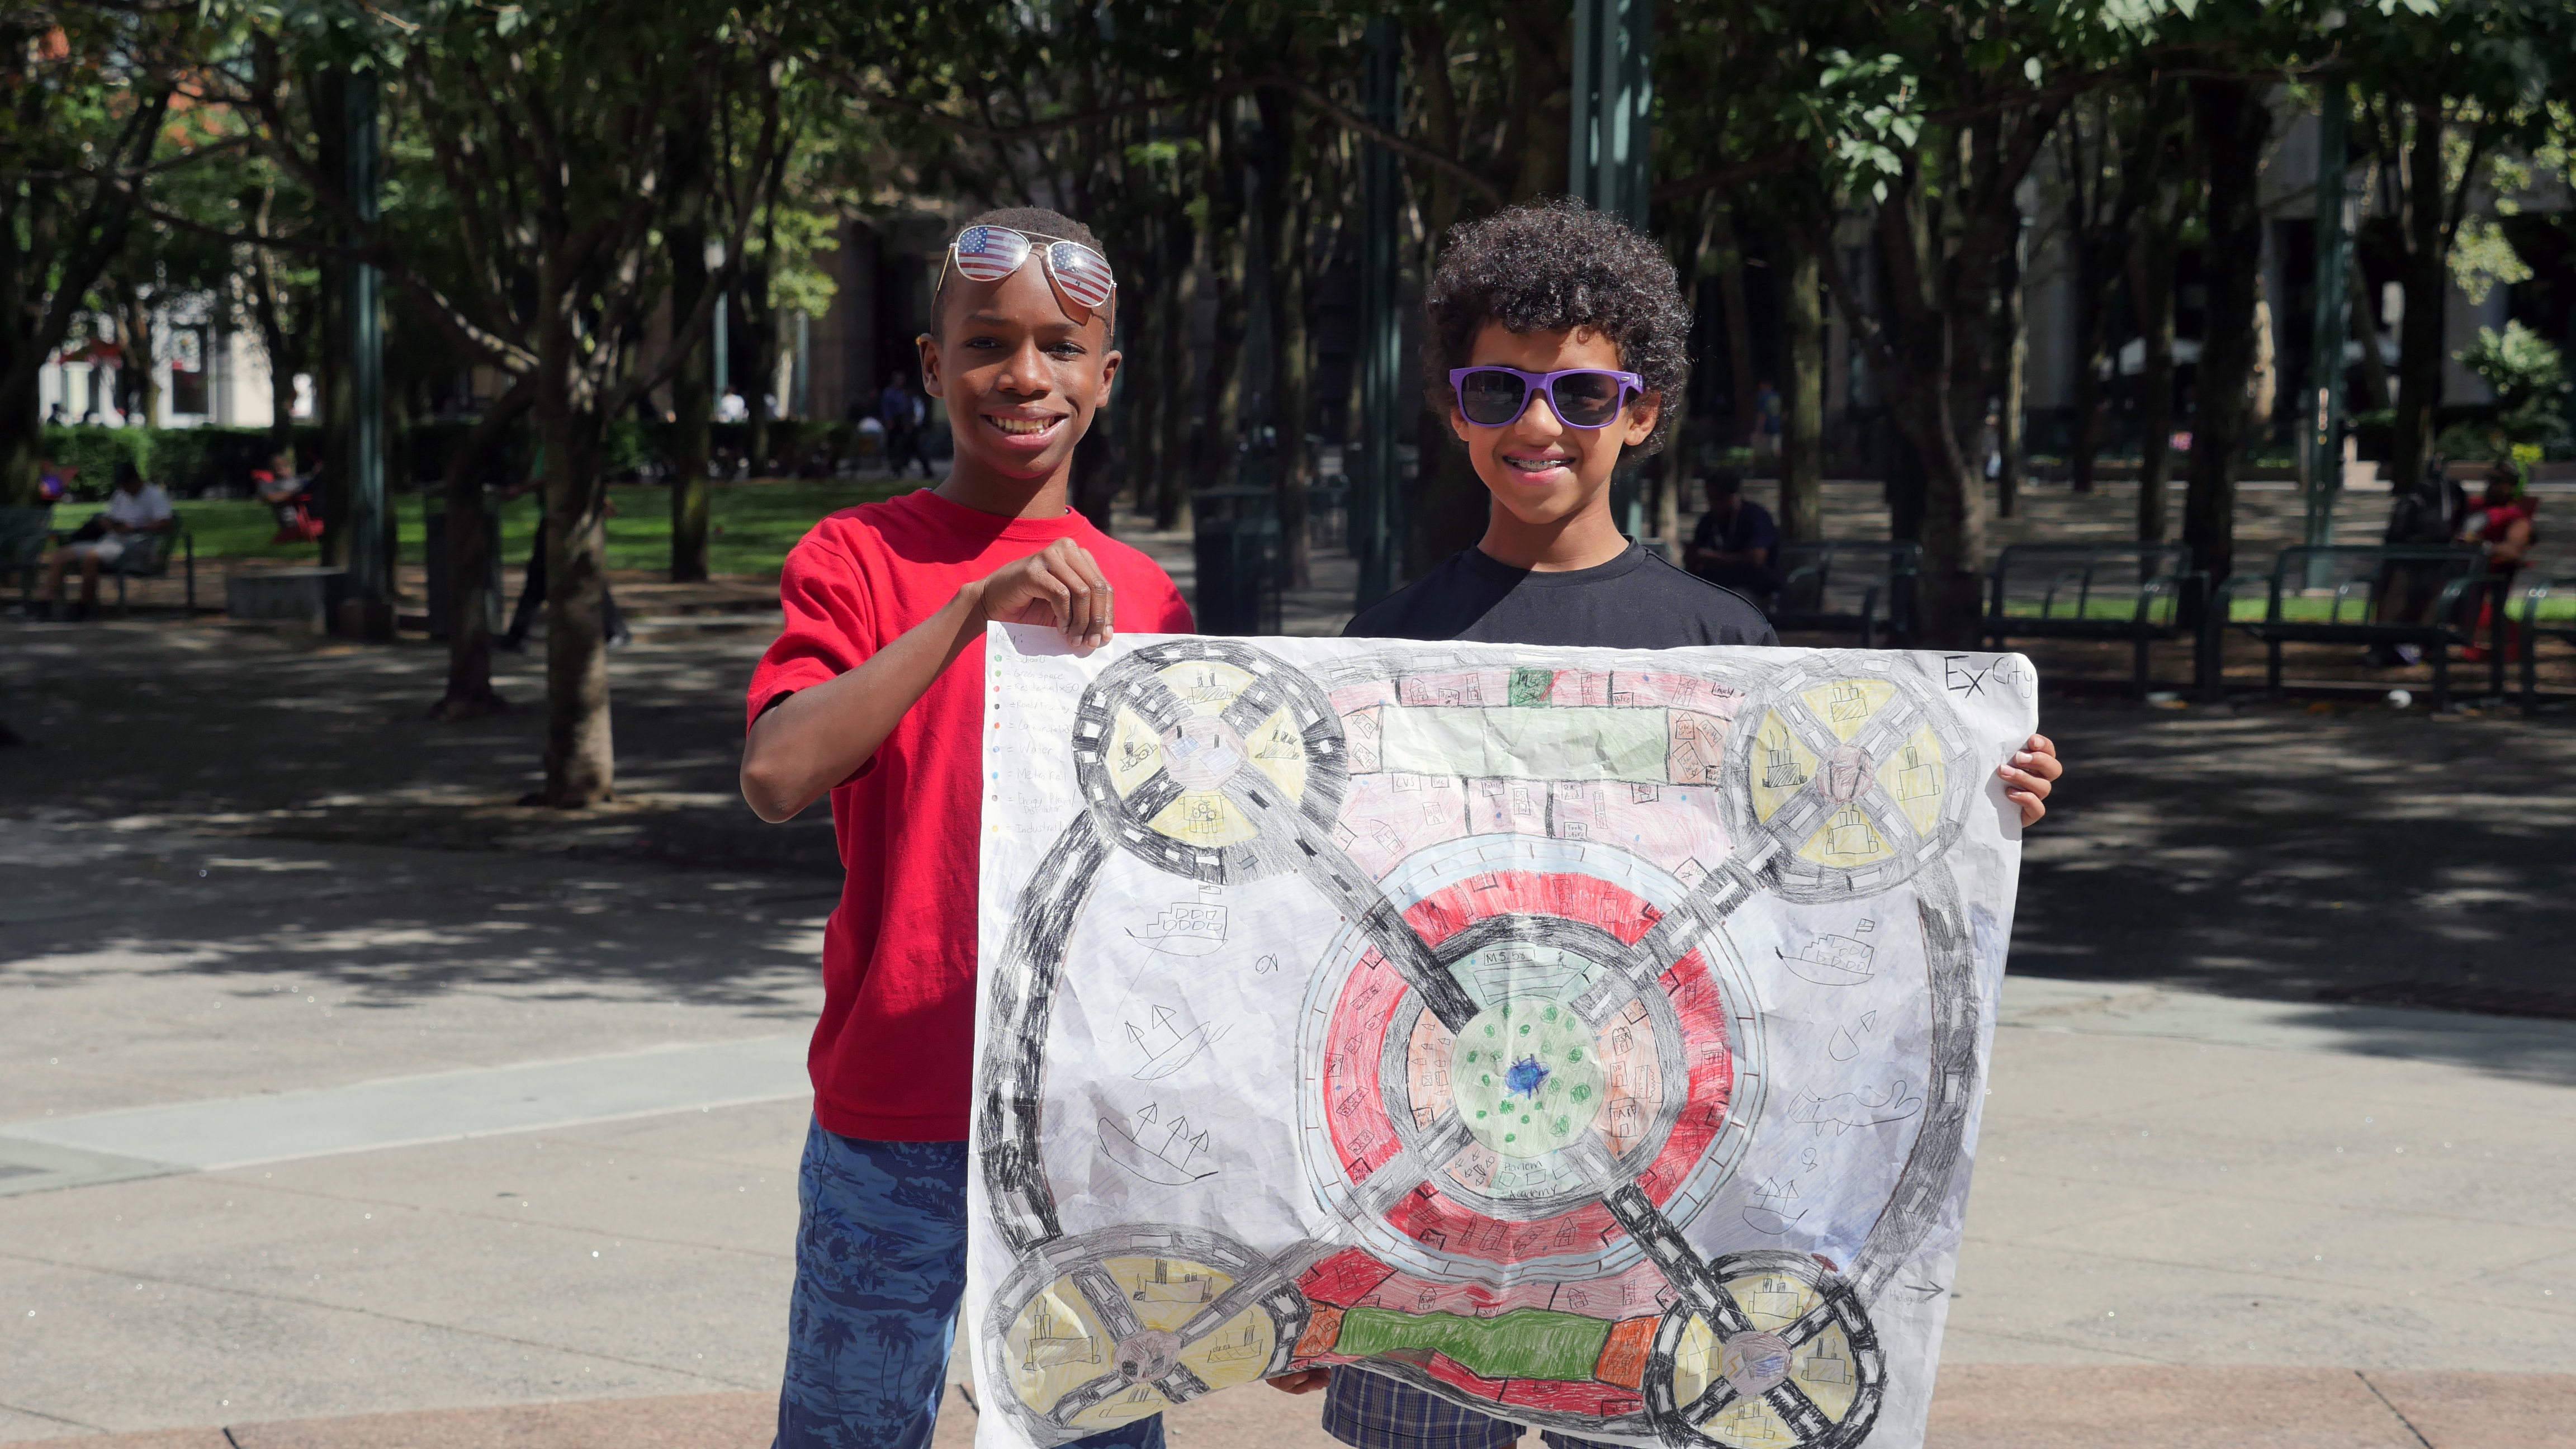 “A smart city helps the city stop polluting.” - Kymoy (left) “It’s important that a smart city meets everyone’s needs… and when there’s no pollution everyone feels more comfortable, and they don’t feel surrounded by trash.” - Johann (right)